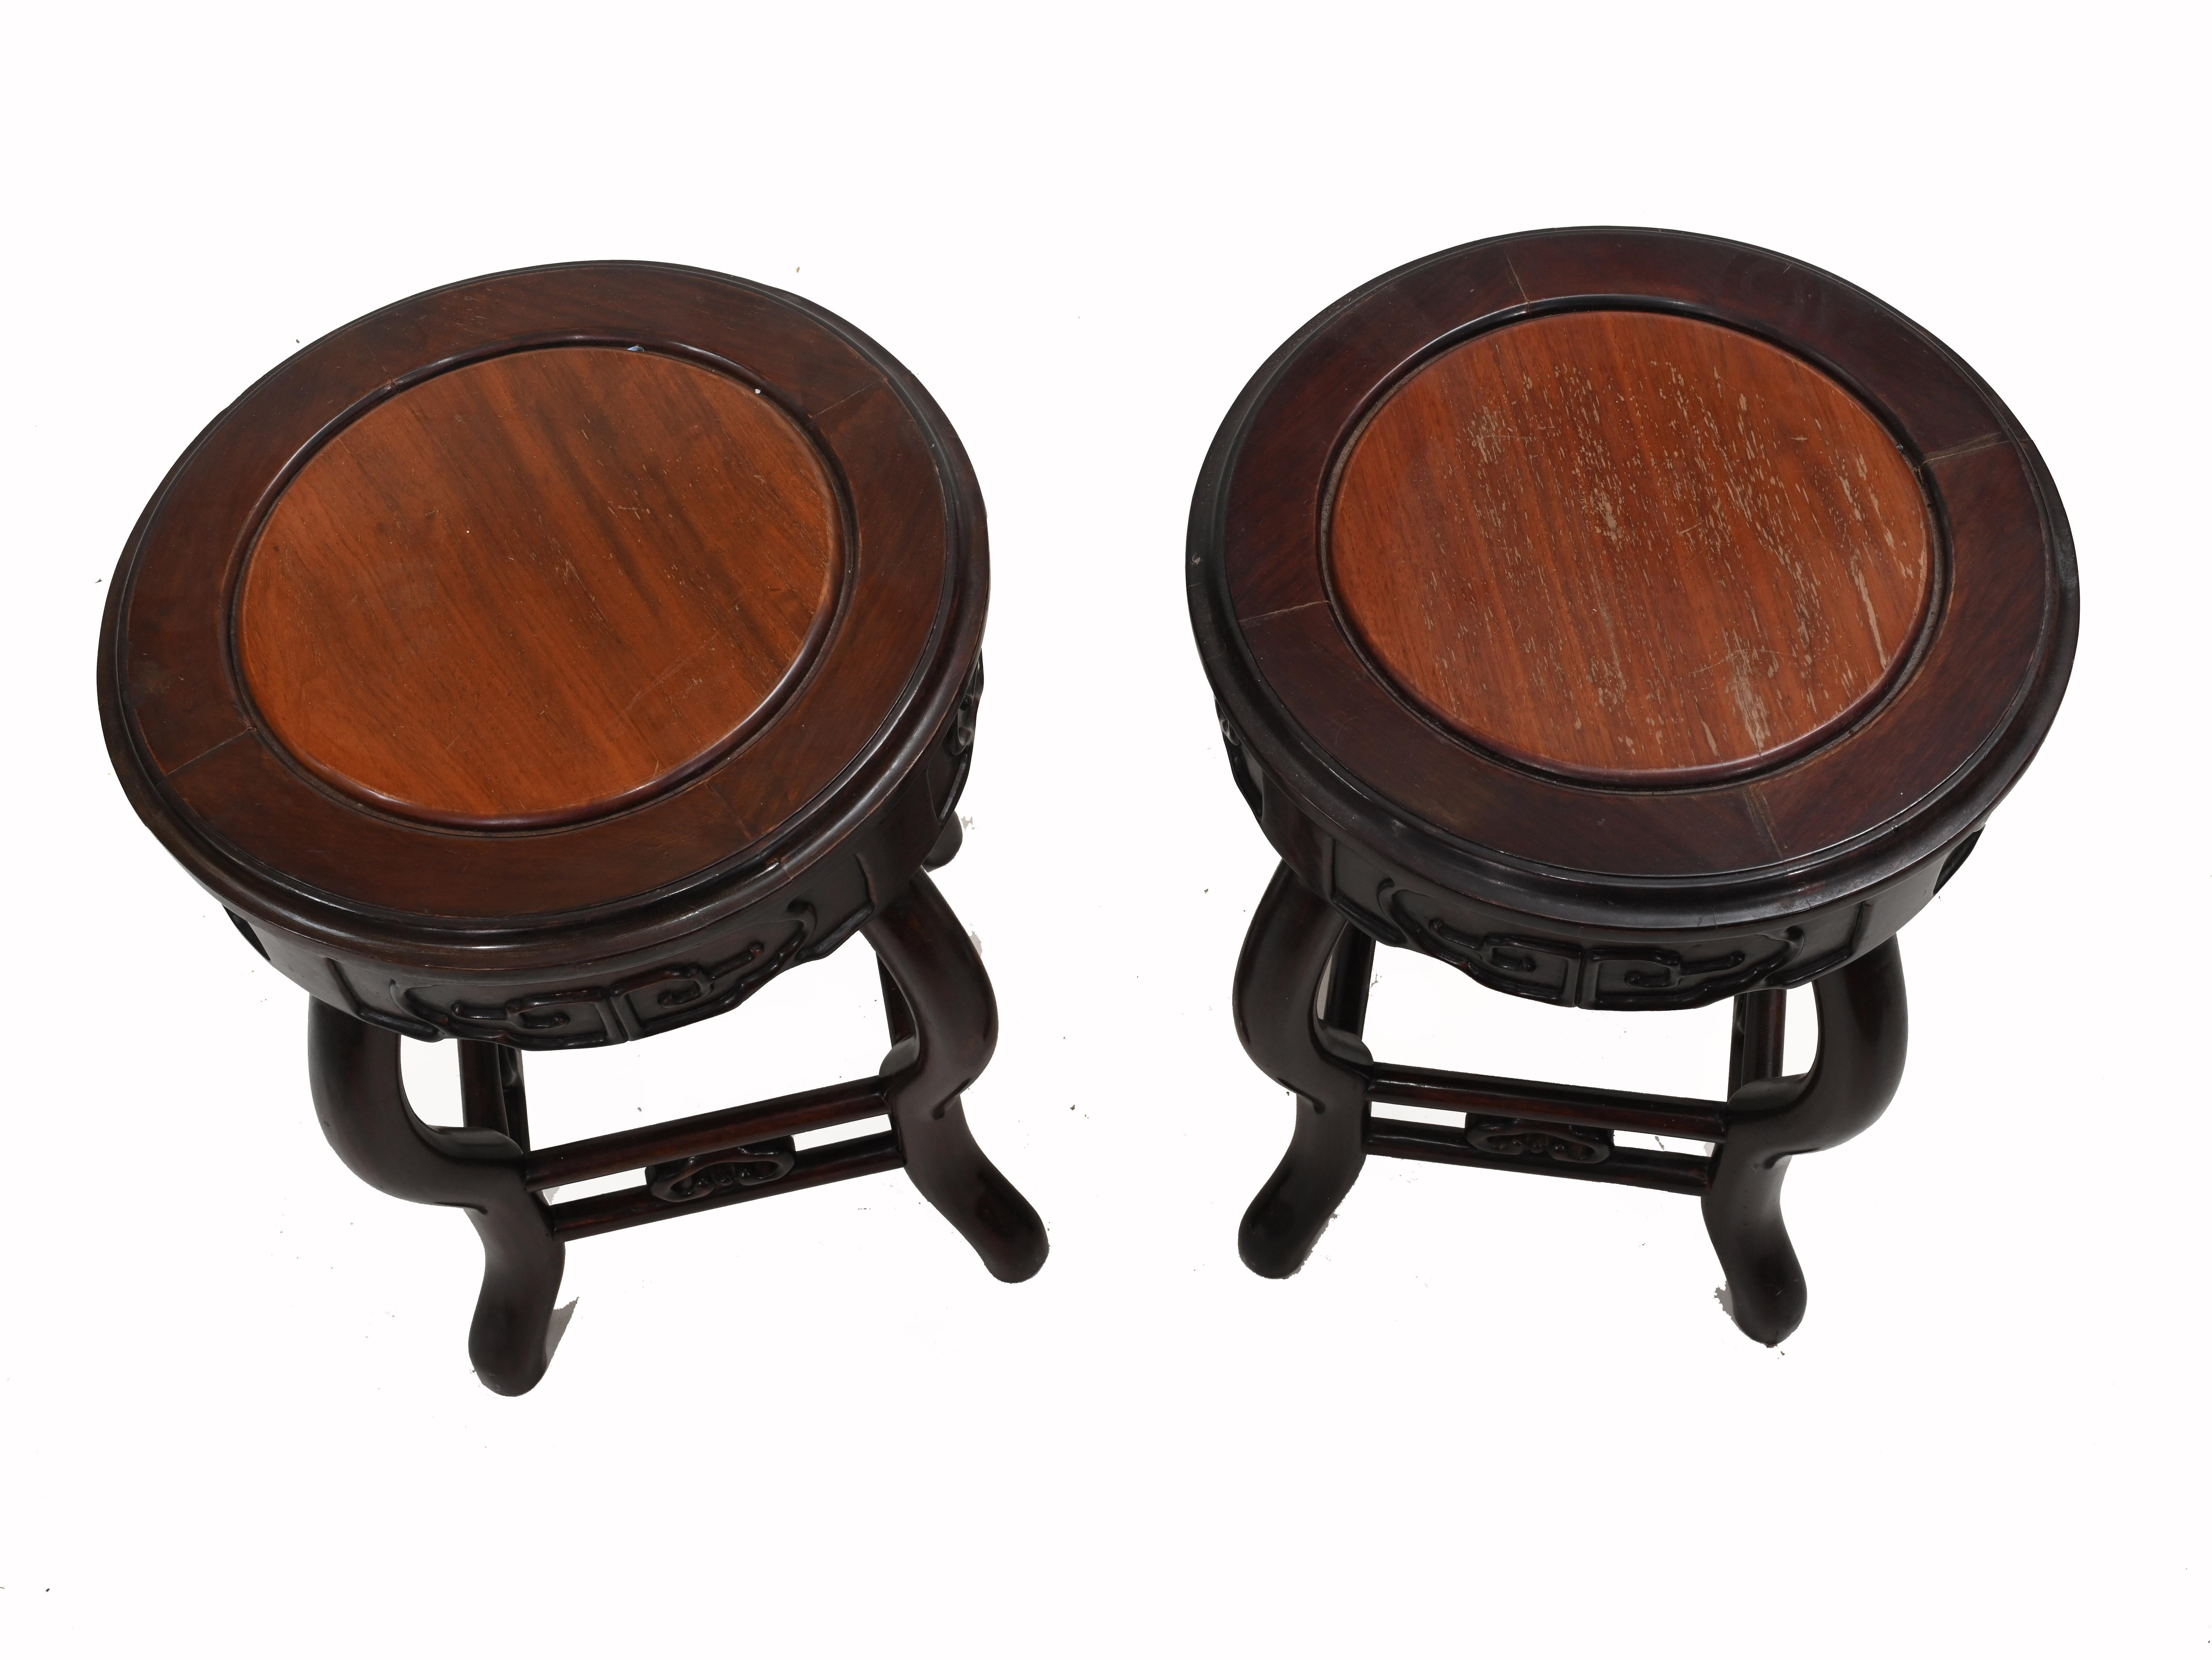 Elegant pair of Chinese pedestal stands in hardwood
Great for displaying decorative pieces such as urns or vases
Circa 1930 
Some of our items are in storage so please check ahead of a viewing to see if it is on our shop floor
Offered in great